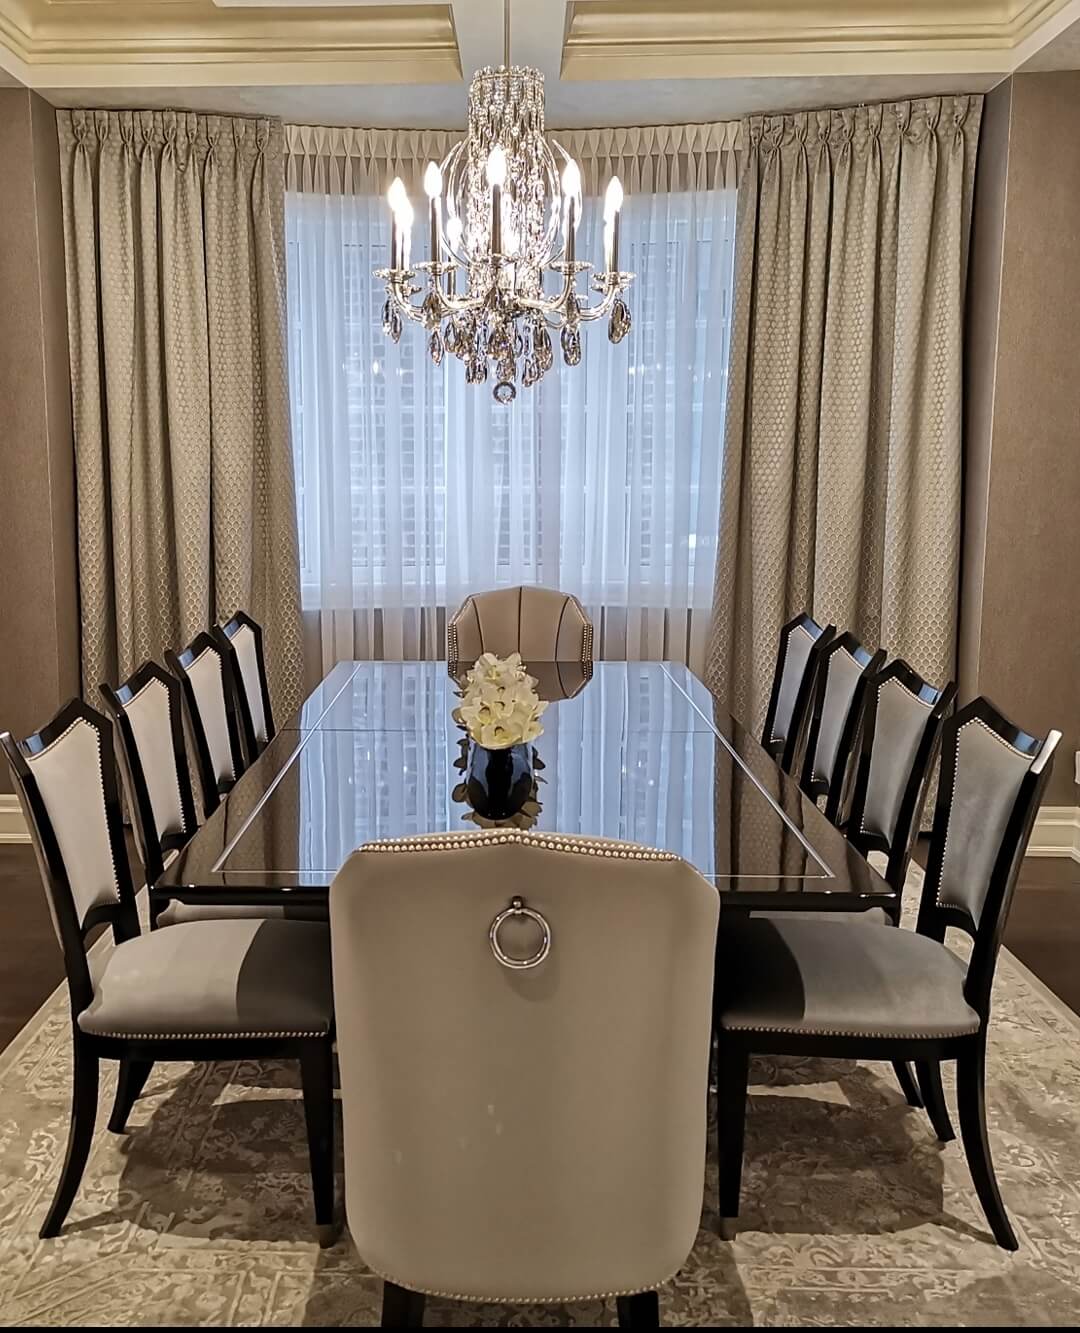 dinning table and chandelier display